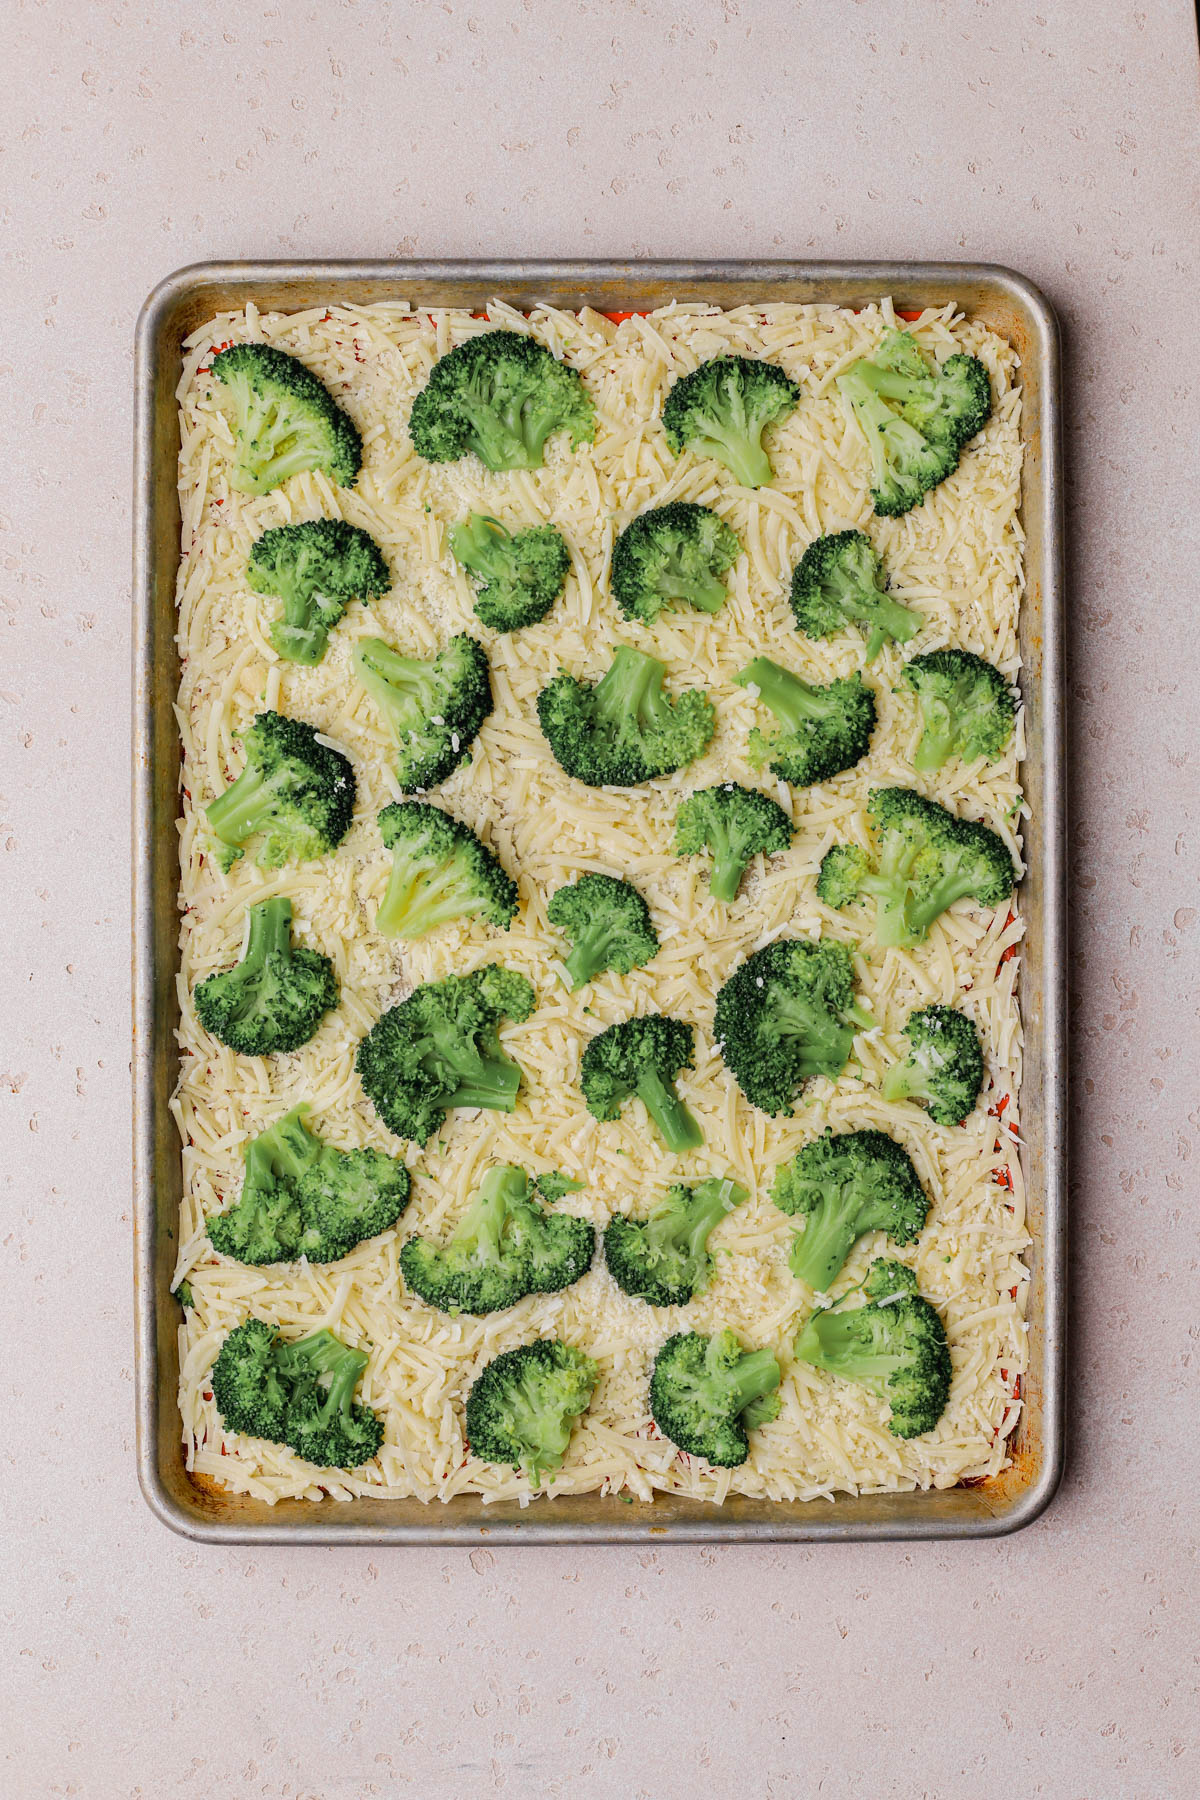 Shredded cheese with broccoli. 